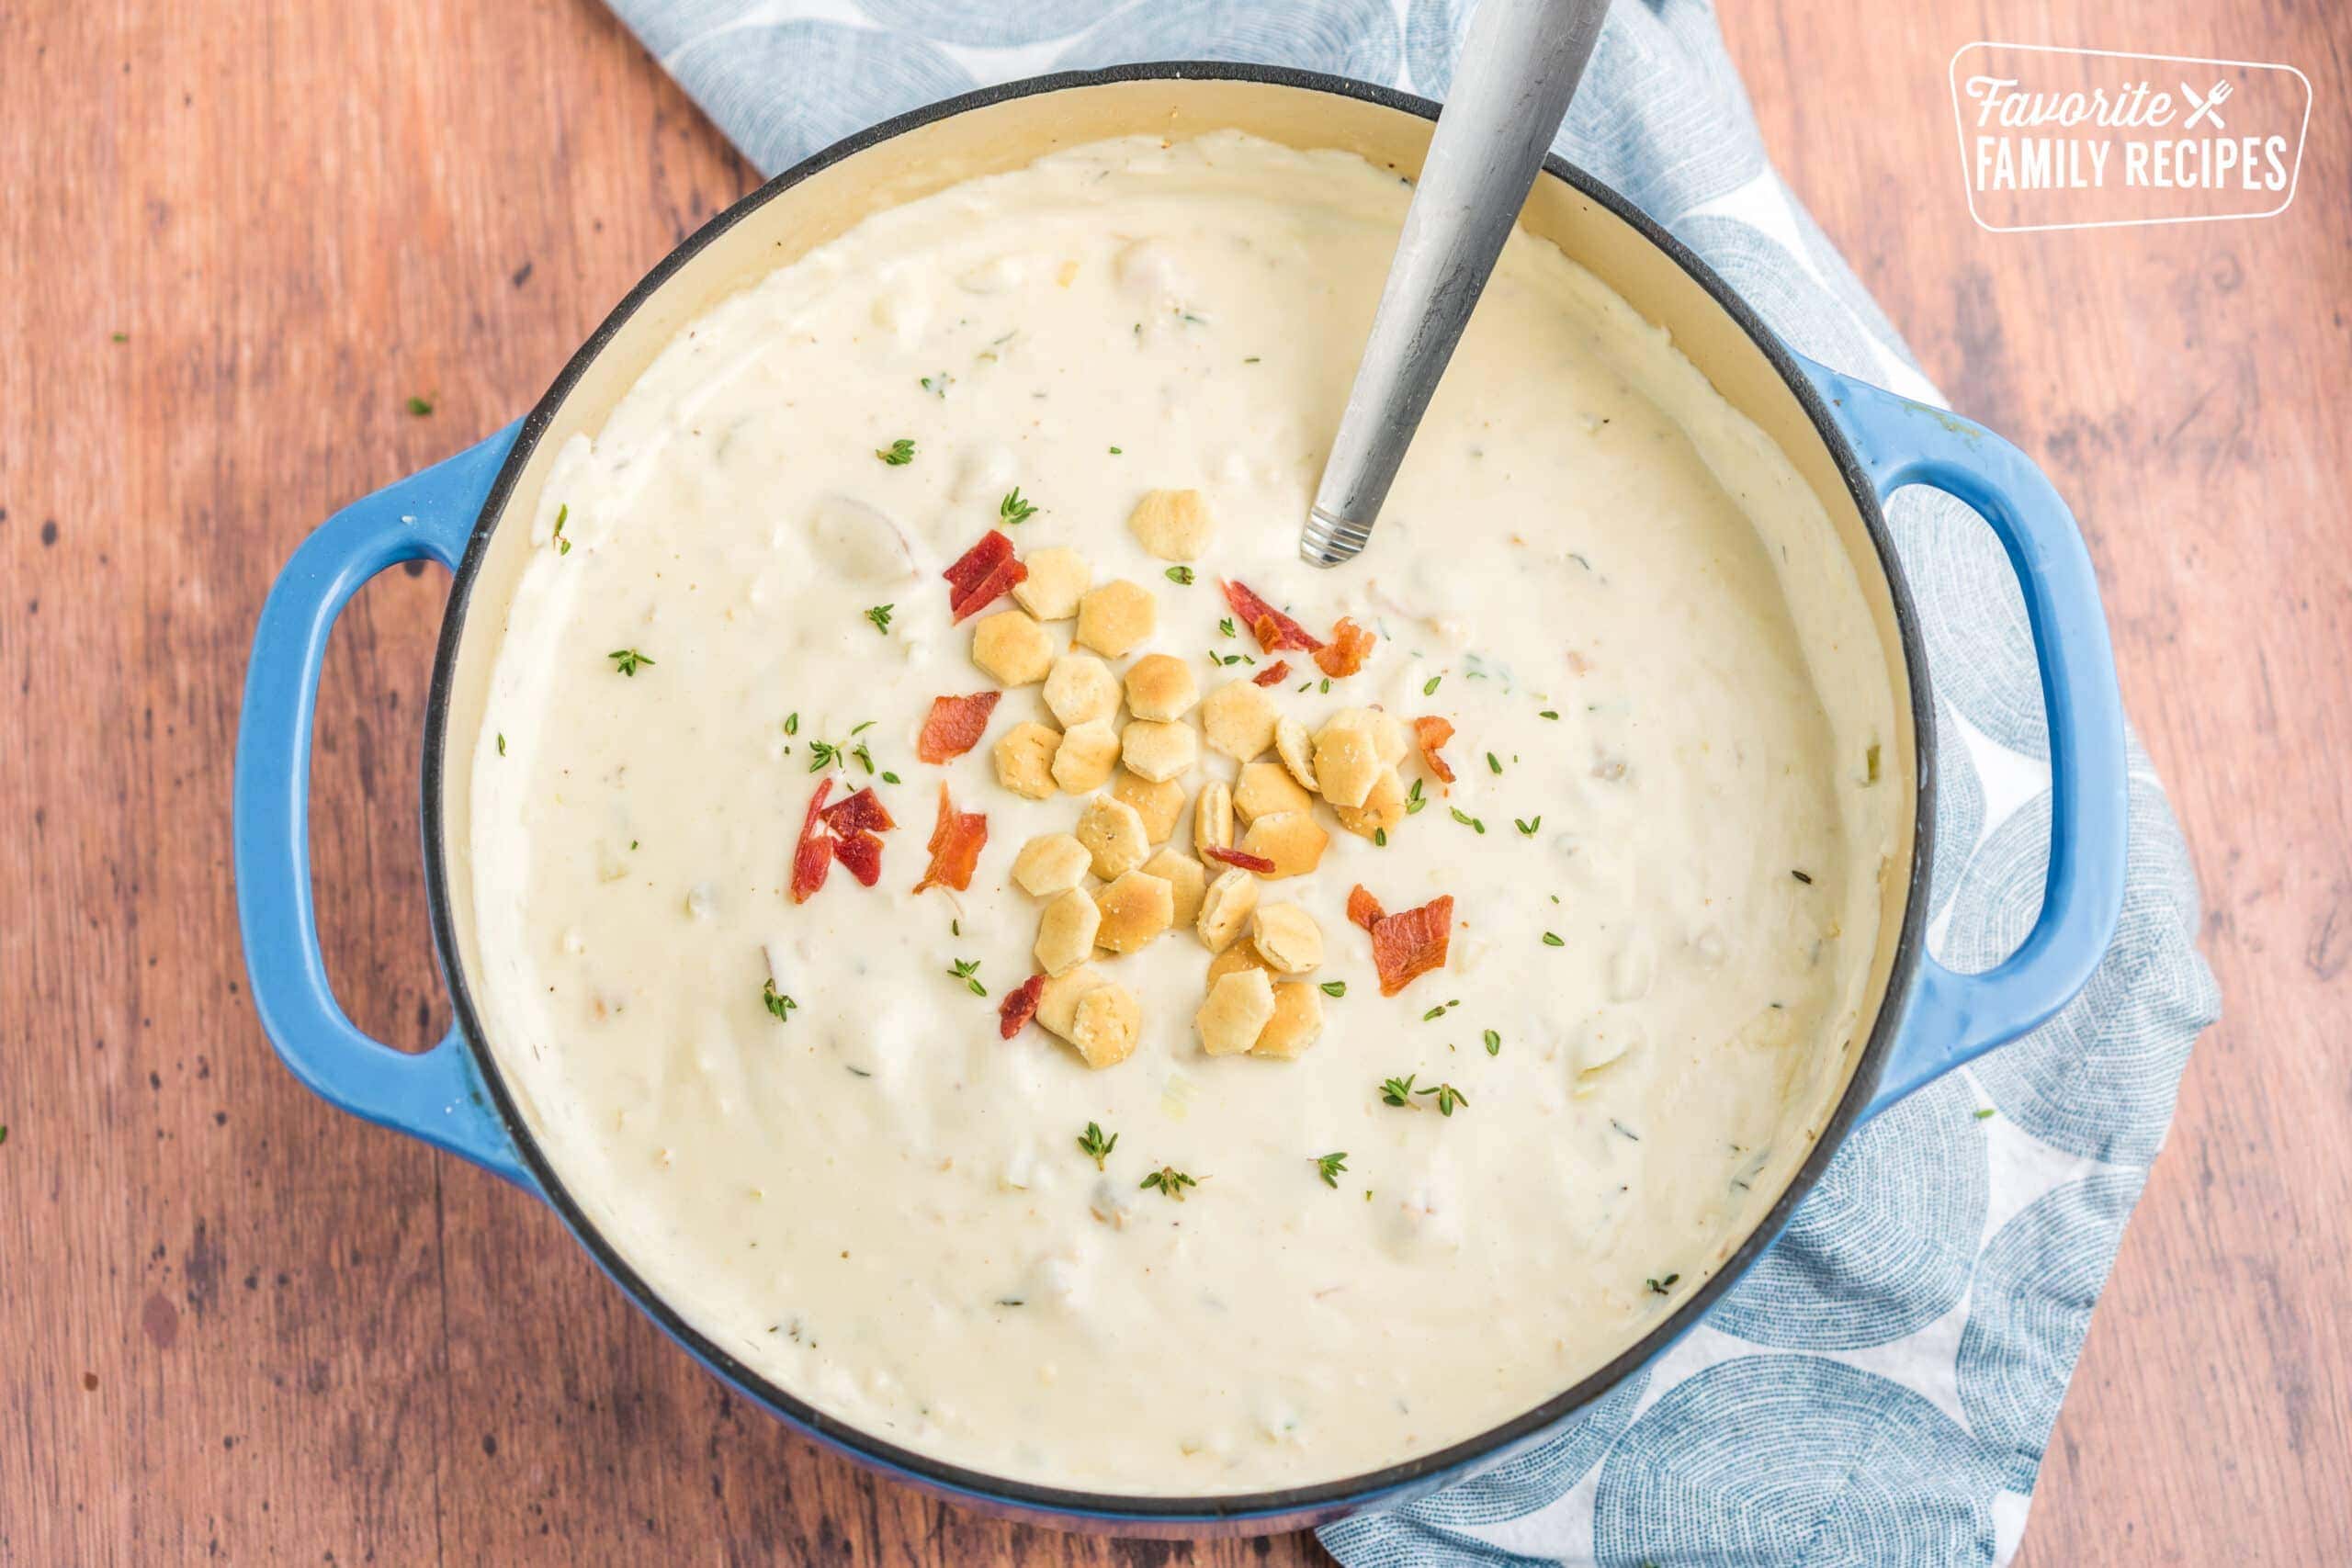 https://www.favfamilyrecipes.com/wp-content/uploads/2020/09/Best-Clam-Chowder-6-scaled.jpg